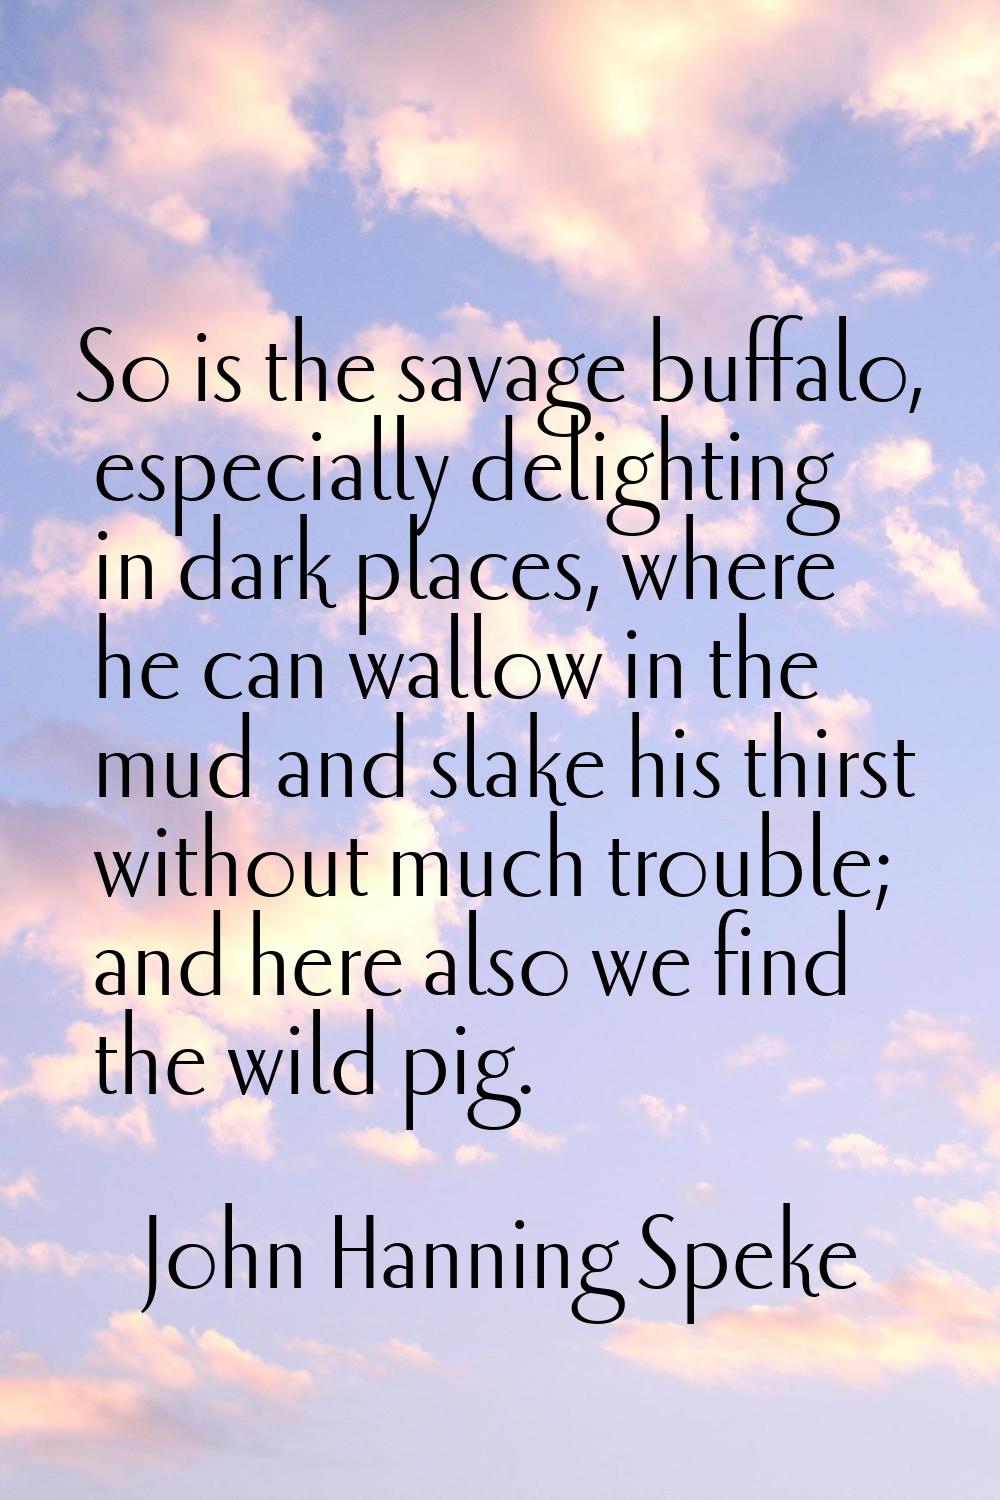 So is the savage buffalo, especially delighting in dark places, where he can wallow in the mud and 